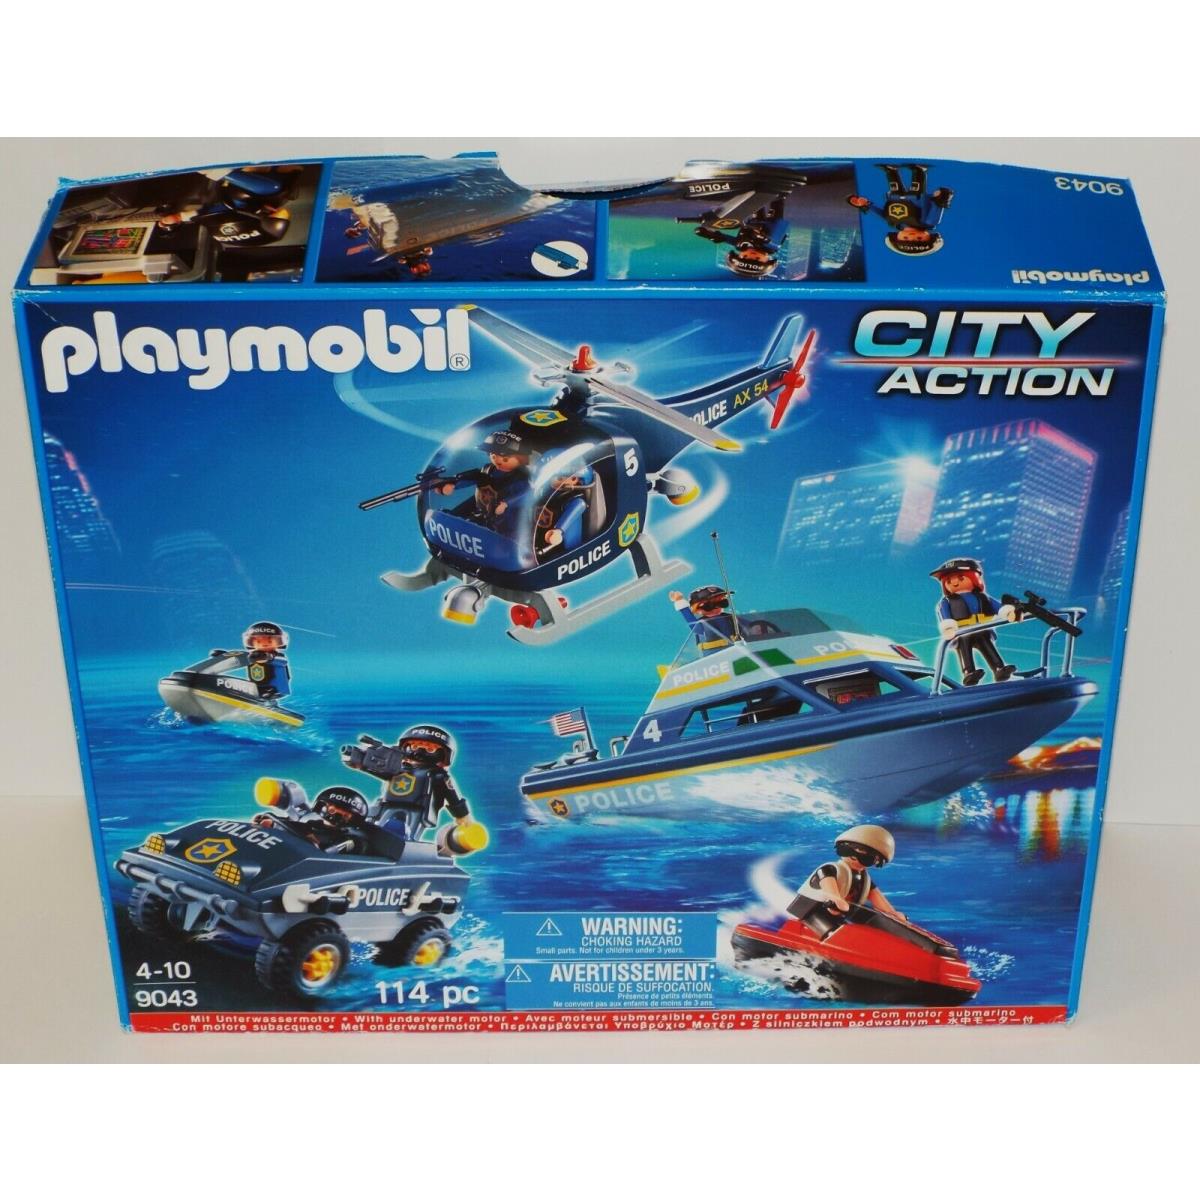 Playmobil 9043 City Action Police 5 Vehicle Playset Boat Jet Ski Helicopter